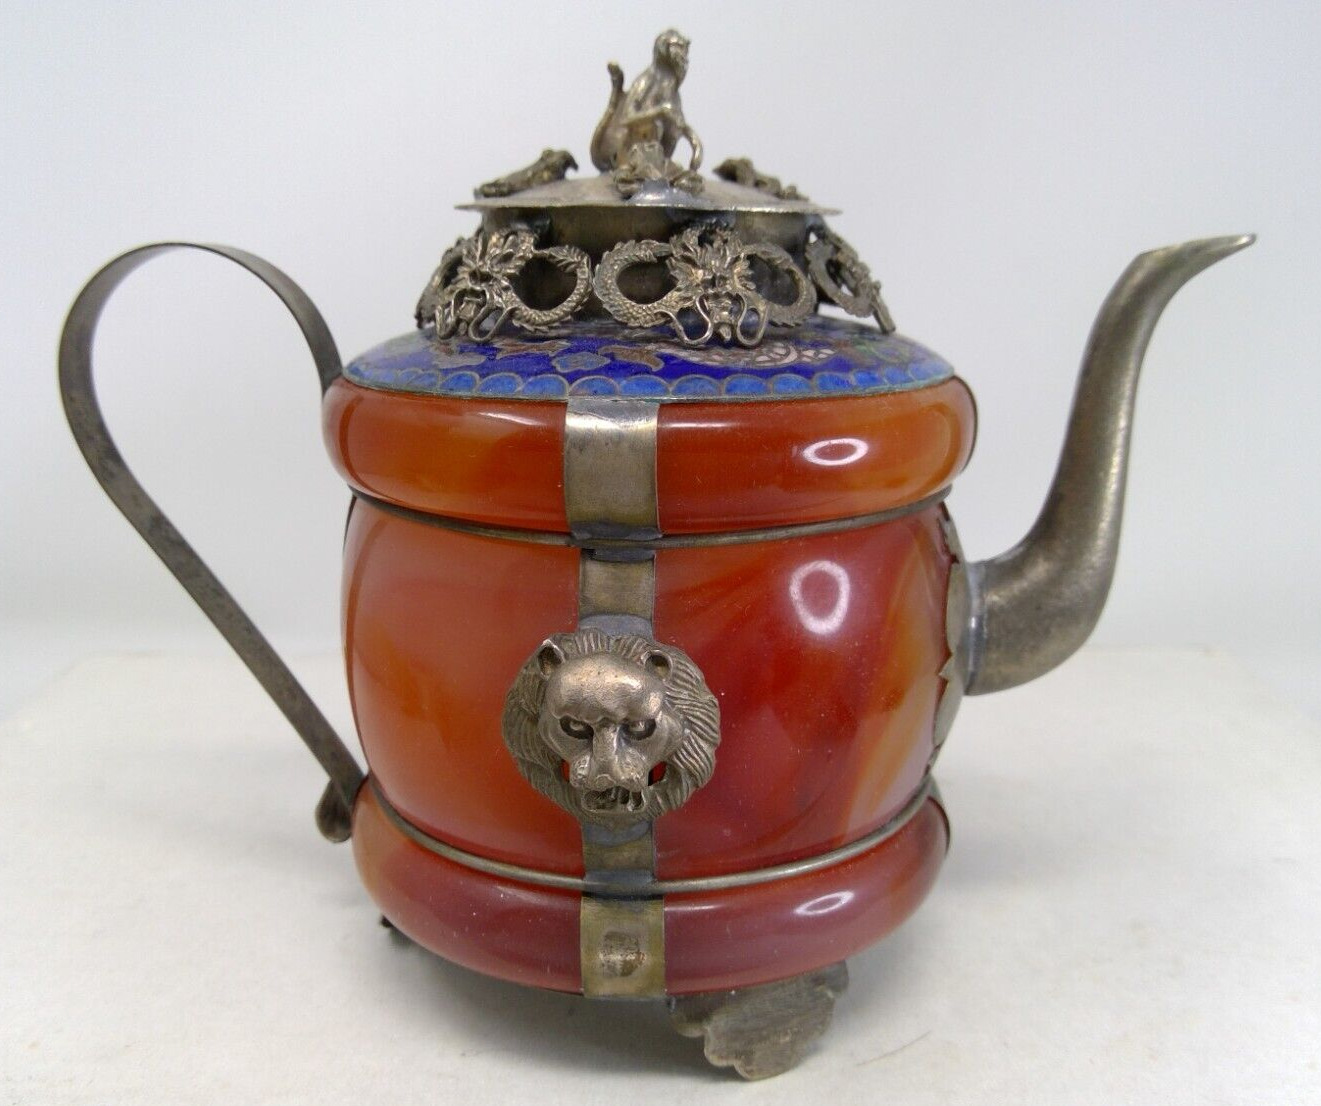 Vintage Small Asian Teapot with Cloisonne